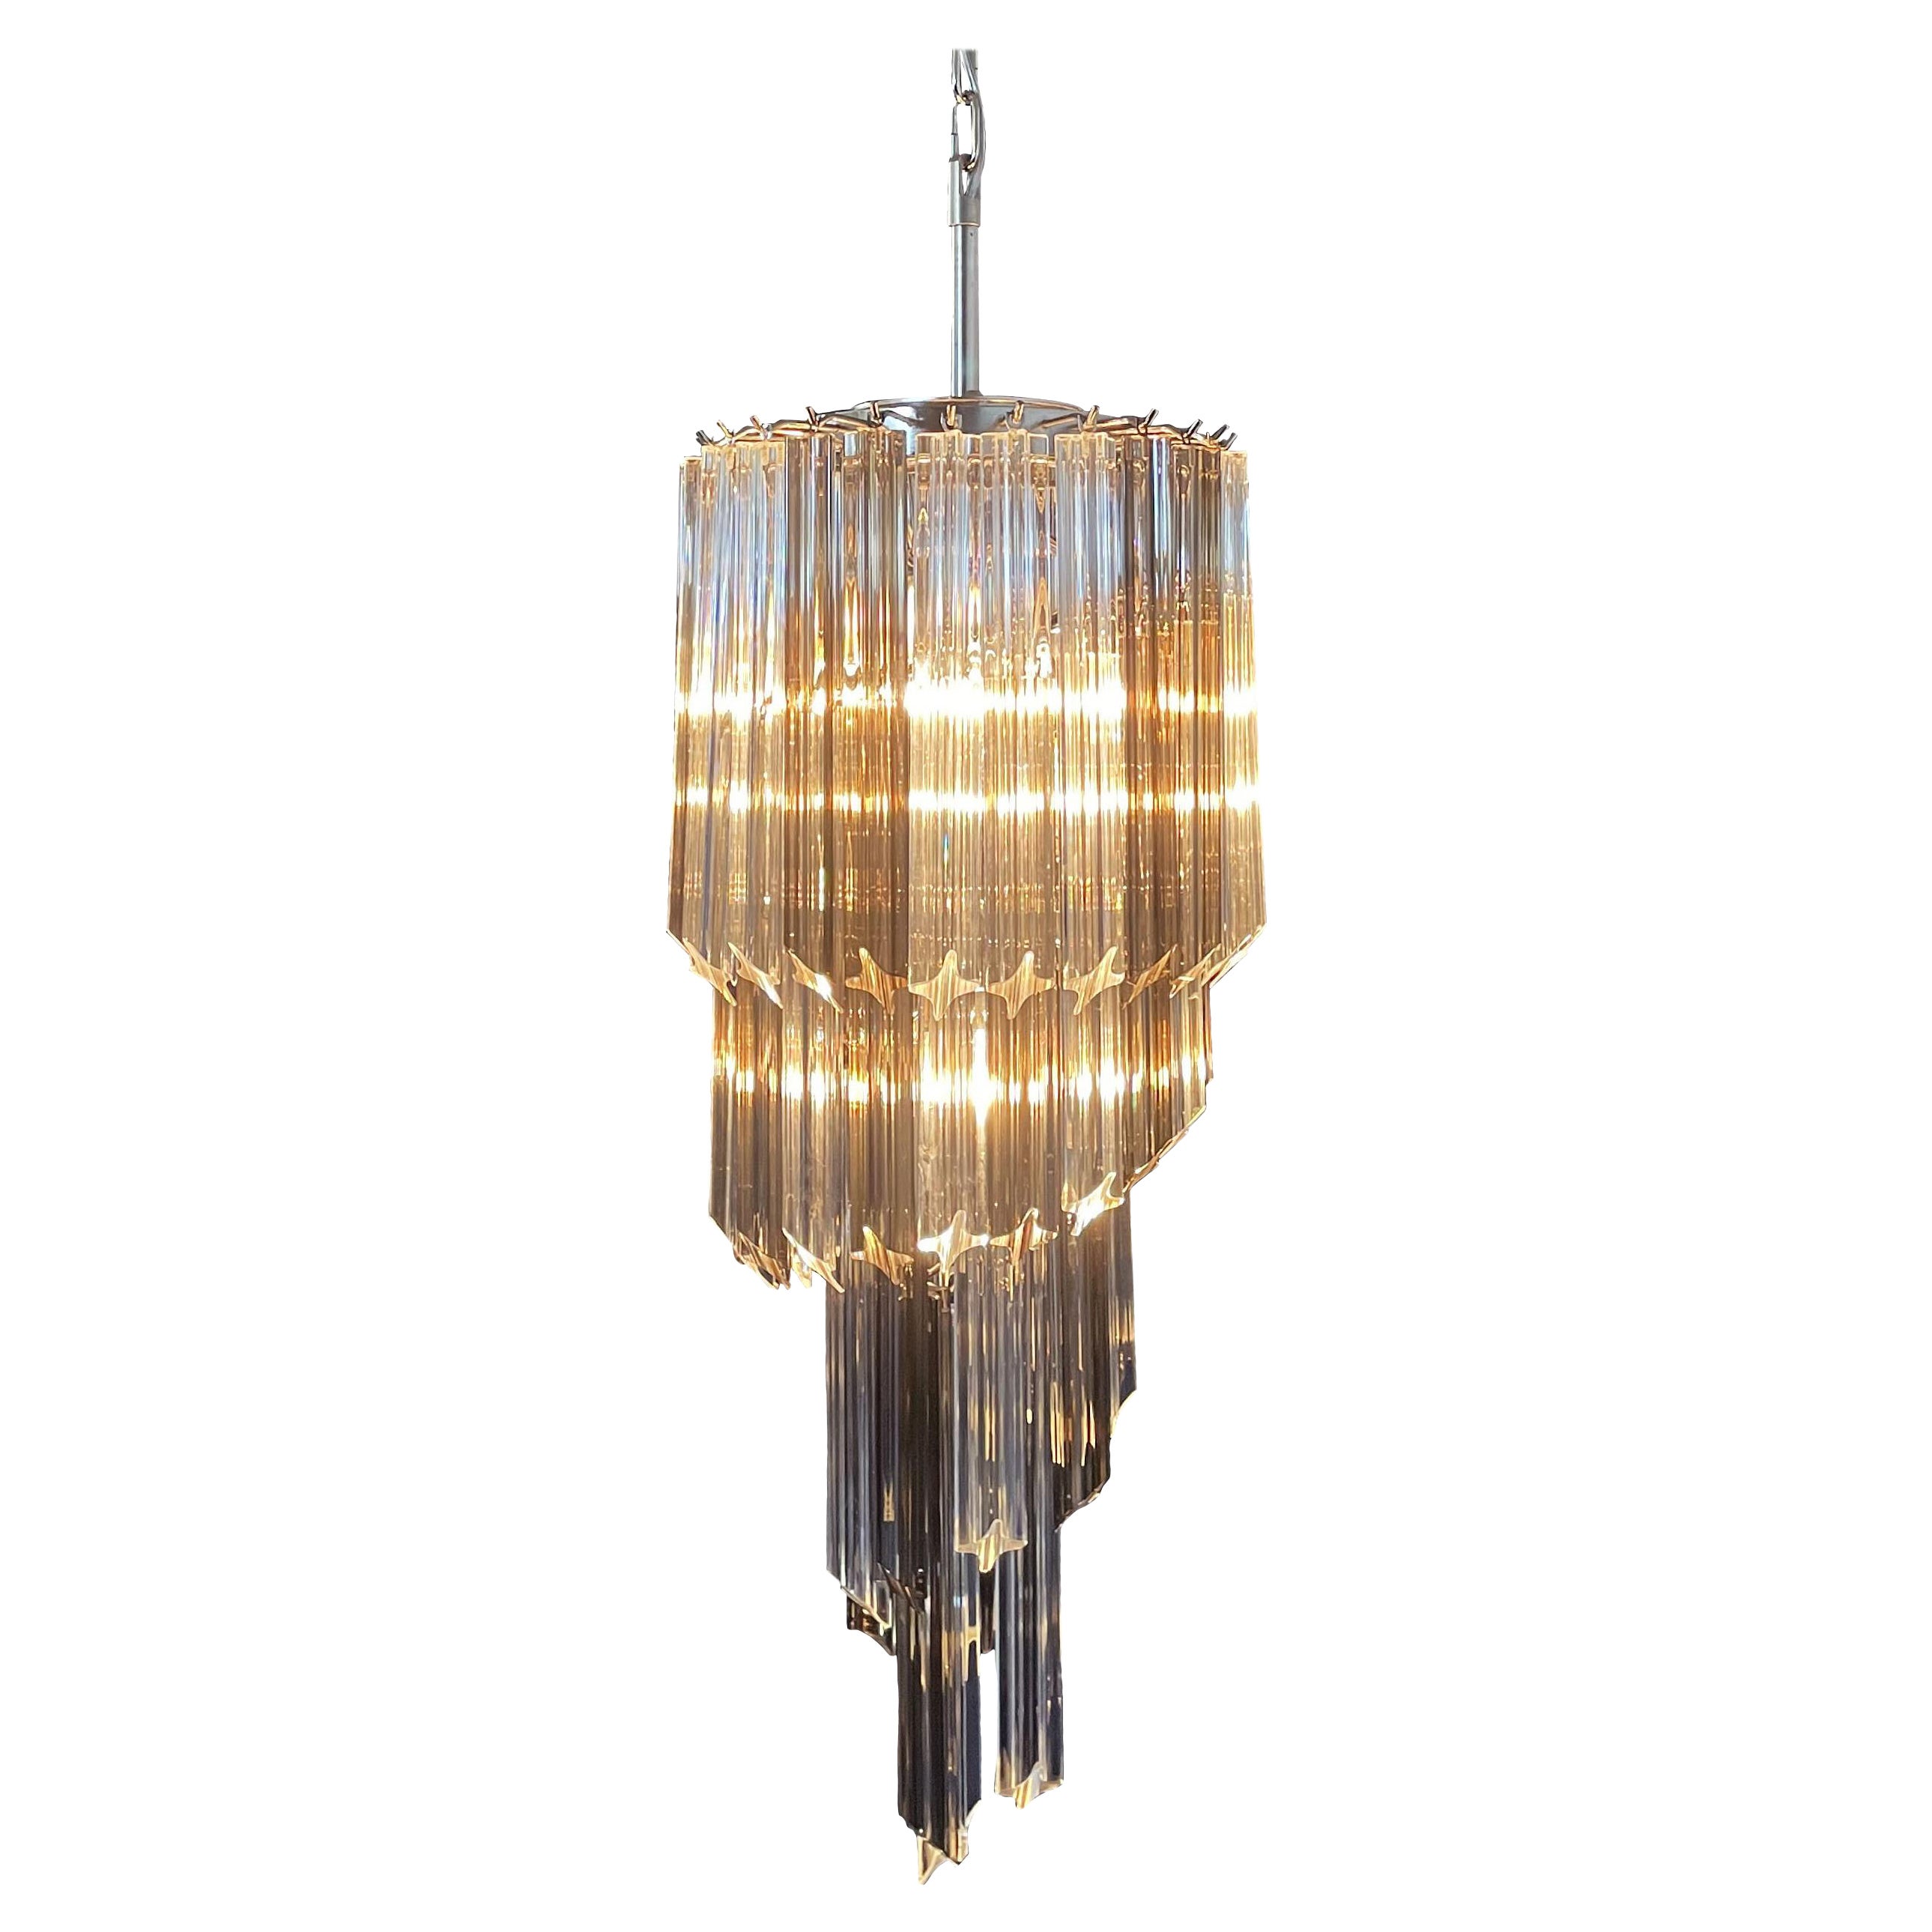 Sophisticated Murano Chandelier – 54 quadriedri prisms transparent and smoked For Sale